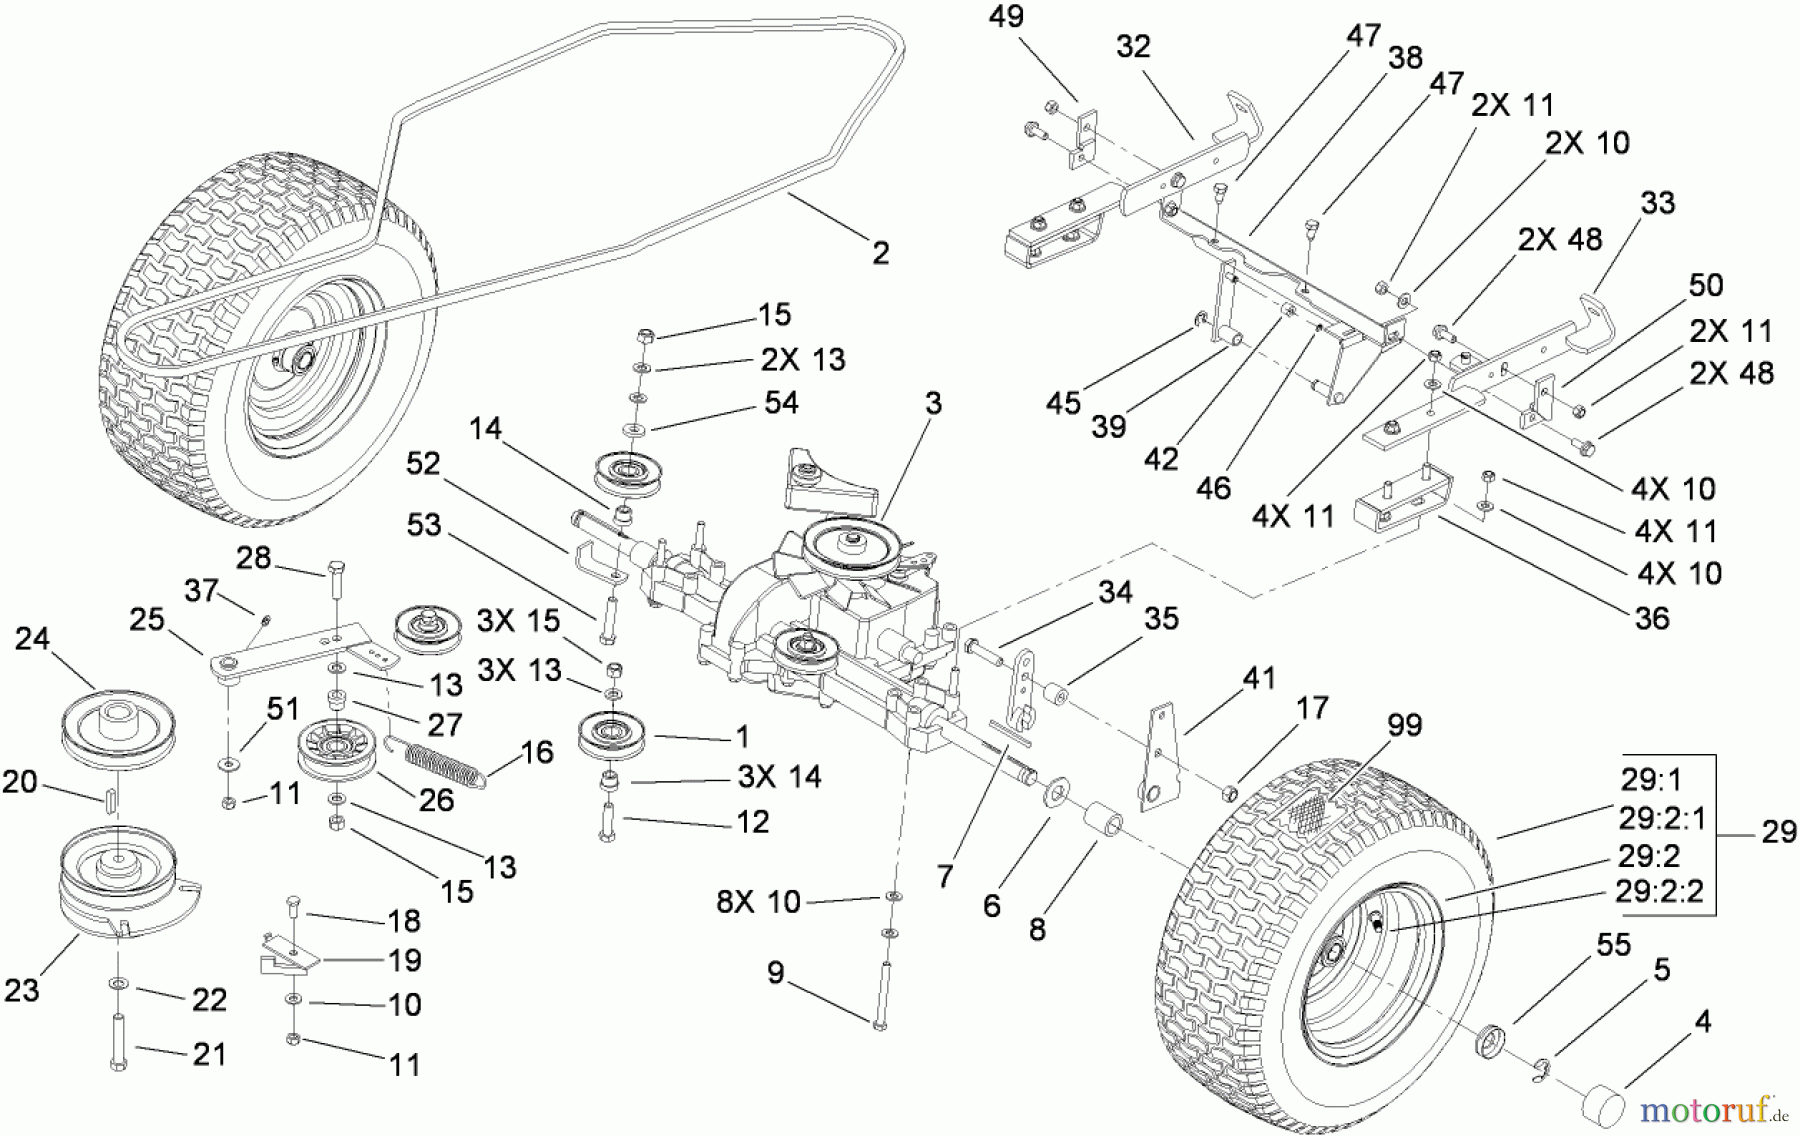  Toro Neu Mowers, Lawn & Garden Tractor Seite 1 74573 (DH 200) - Toro DH 200 Lawn Tractor, 2009 (290000001-290000480) TRANSMISSION DRIVE ASSEMBLY